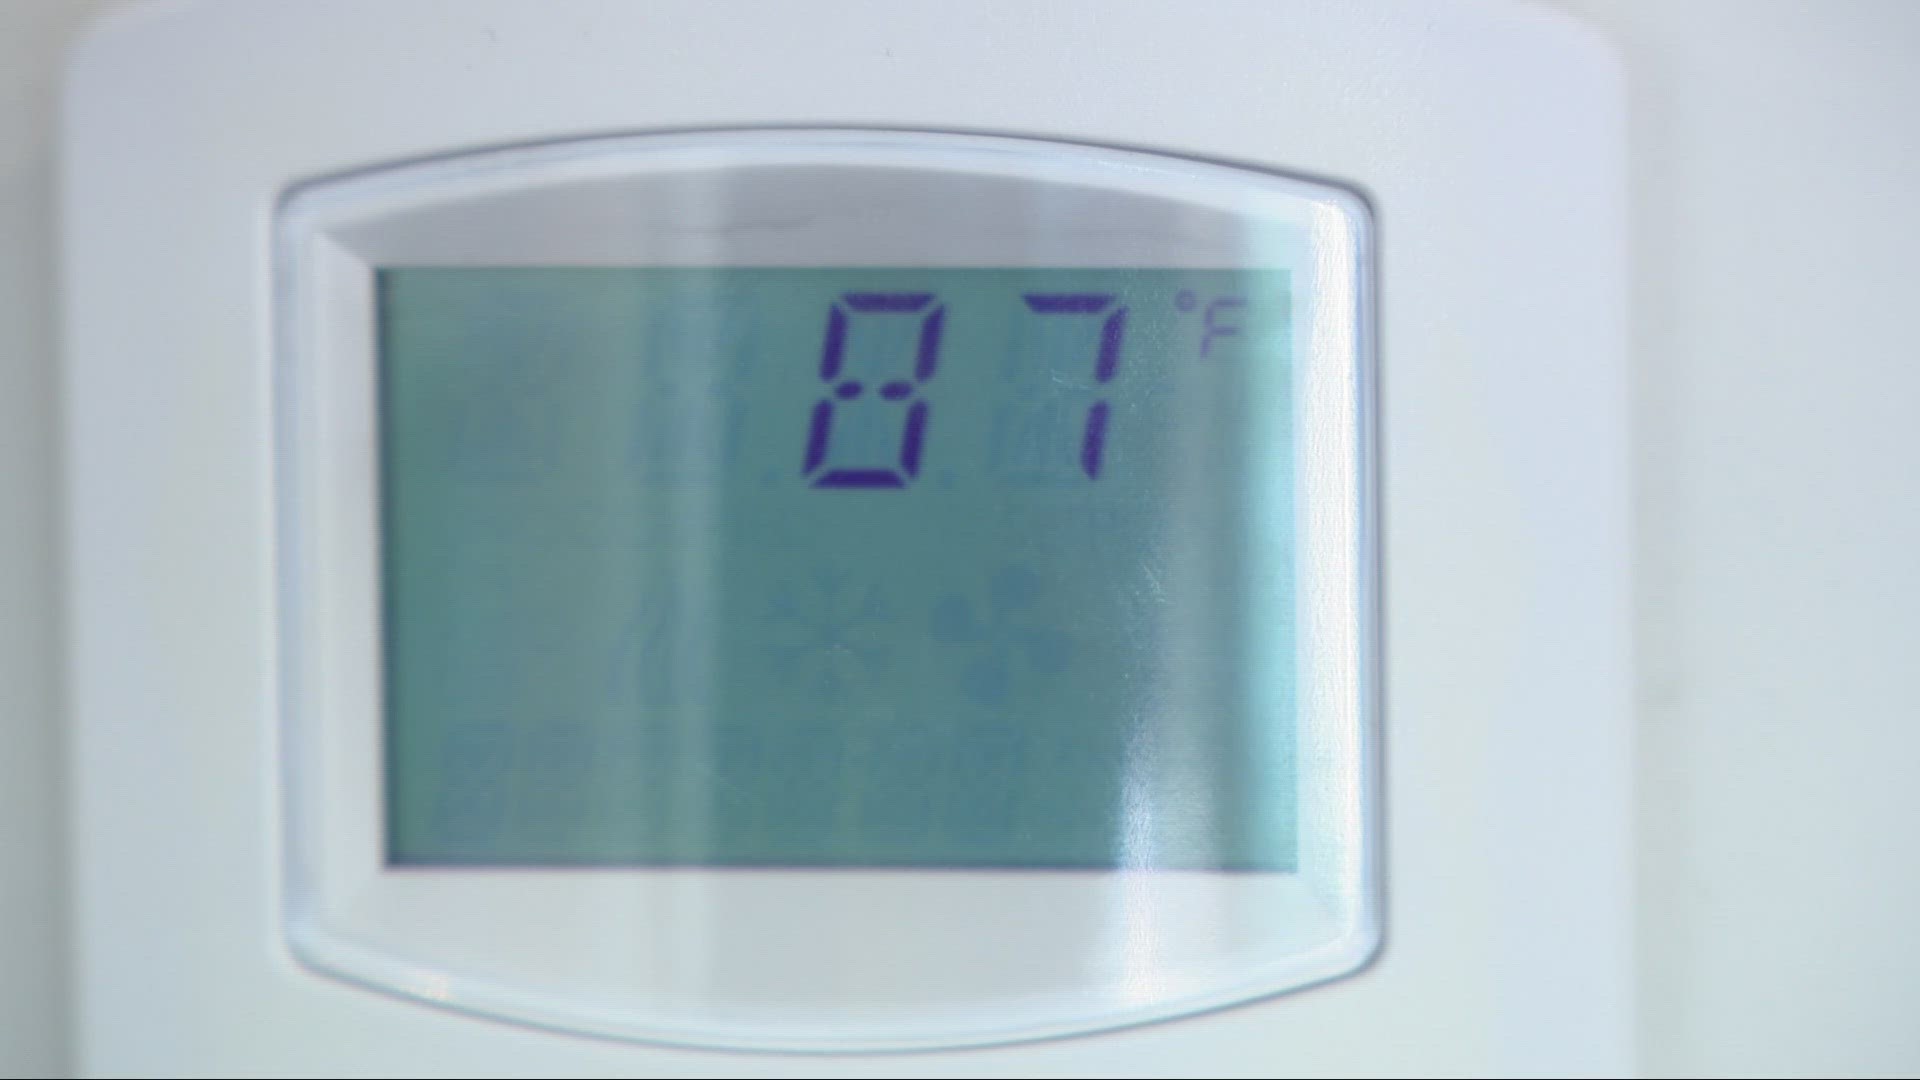 For the second time this summer, residents at Center North Luxury Apartments in Lakewood are without air conditioning for an extended period of time.